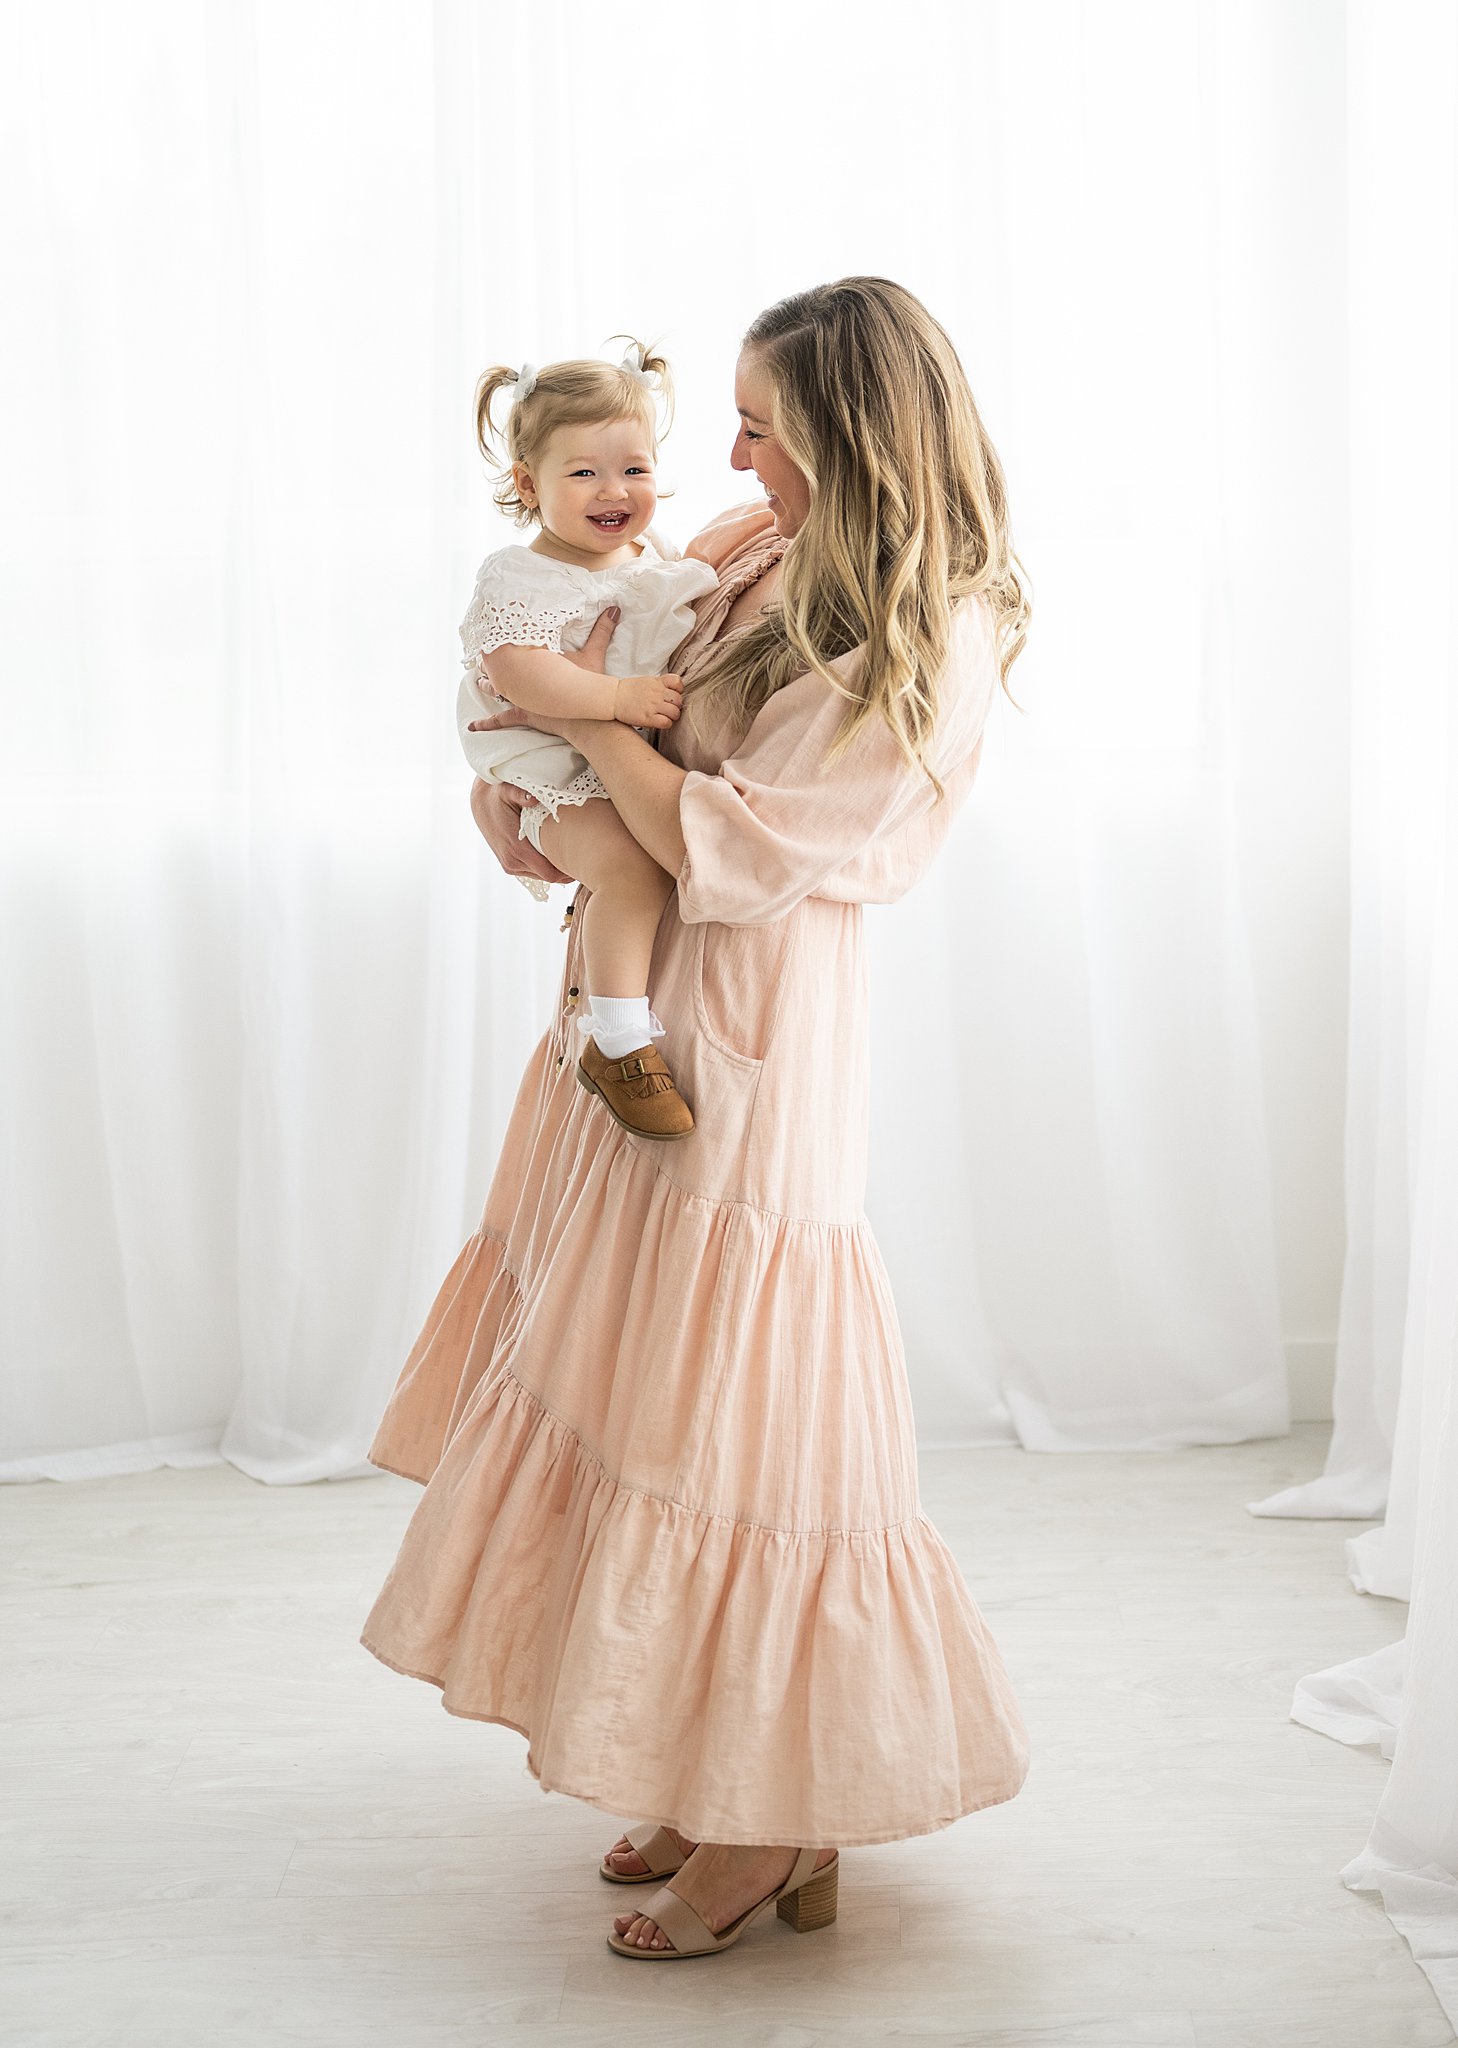 A mother in a pink dress stands in a studio bouncing her toddler daughter on her hip